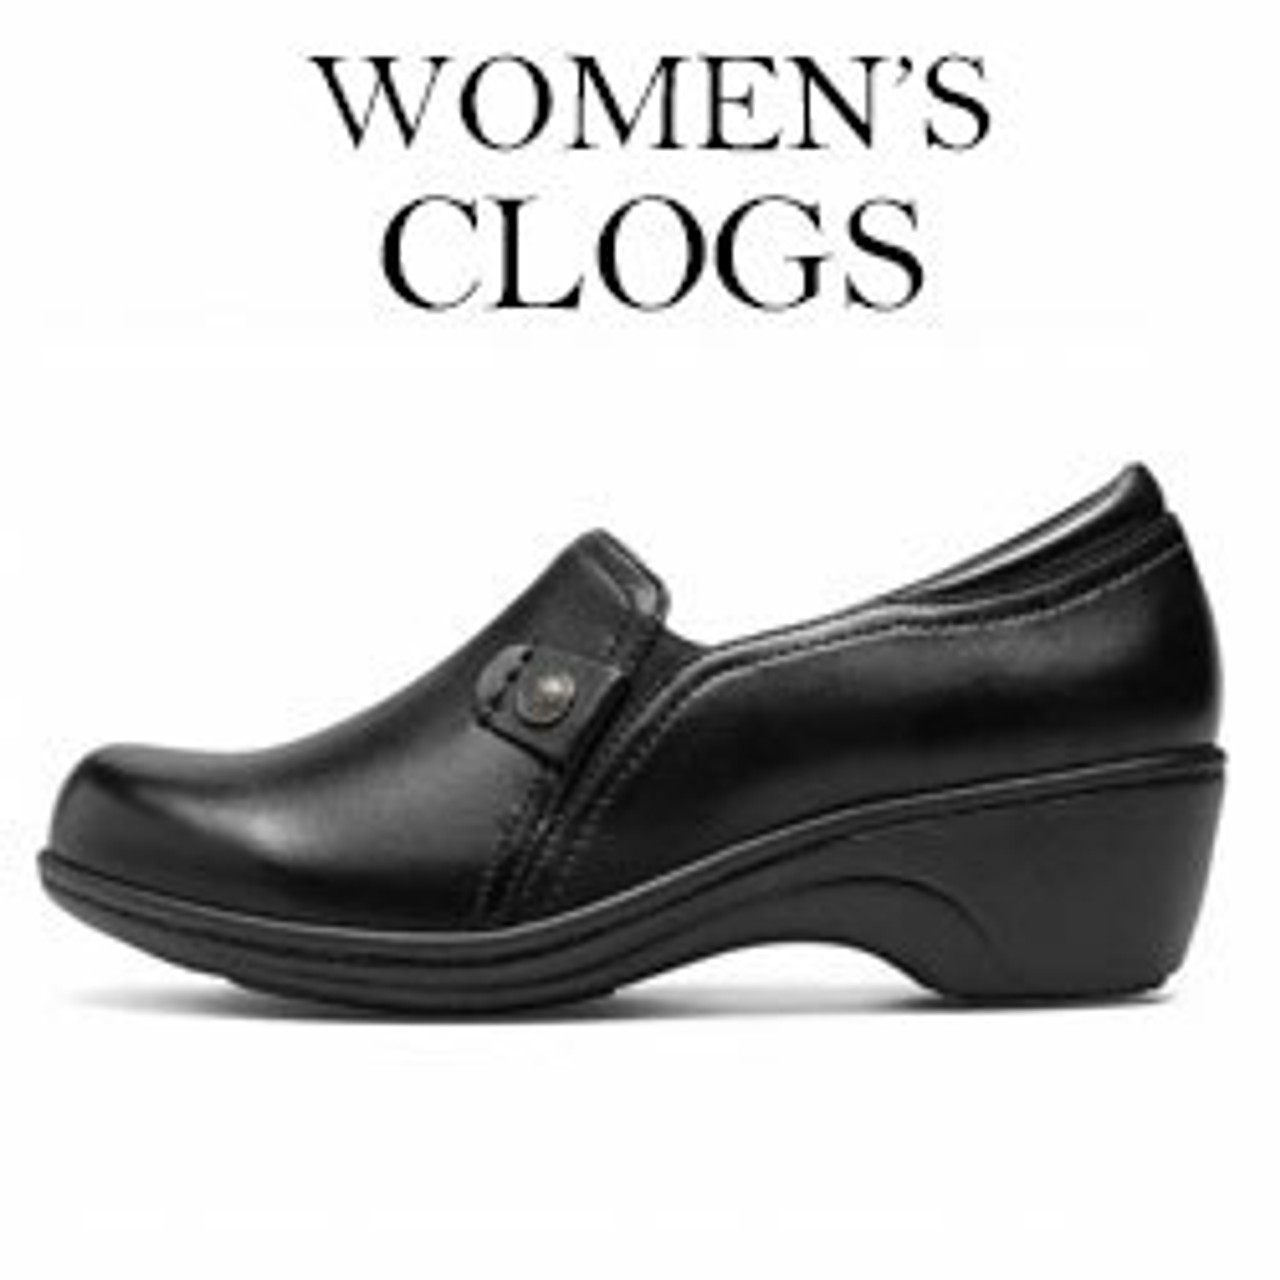 Orthopedic Clogs For Women | Clog Shoes For Women